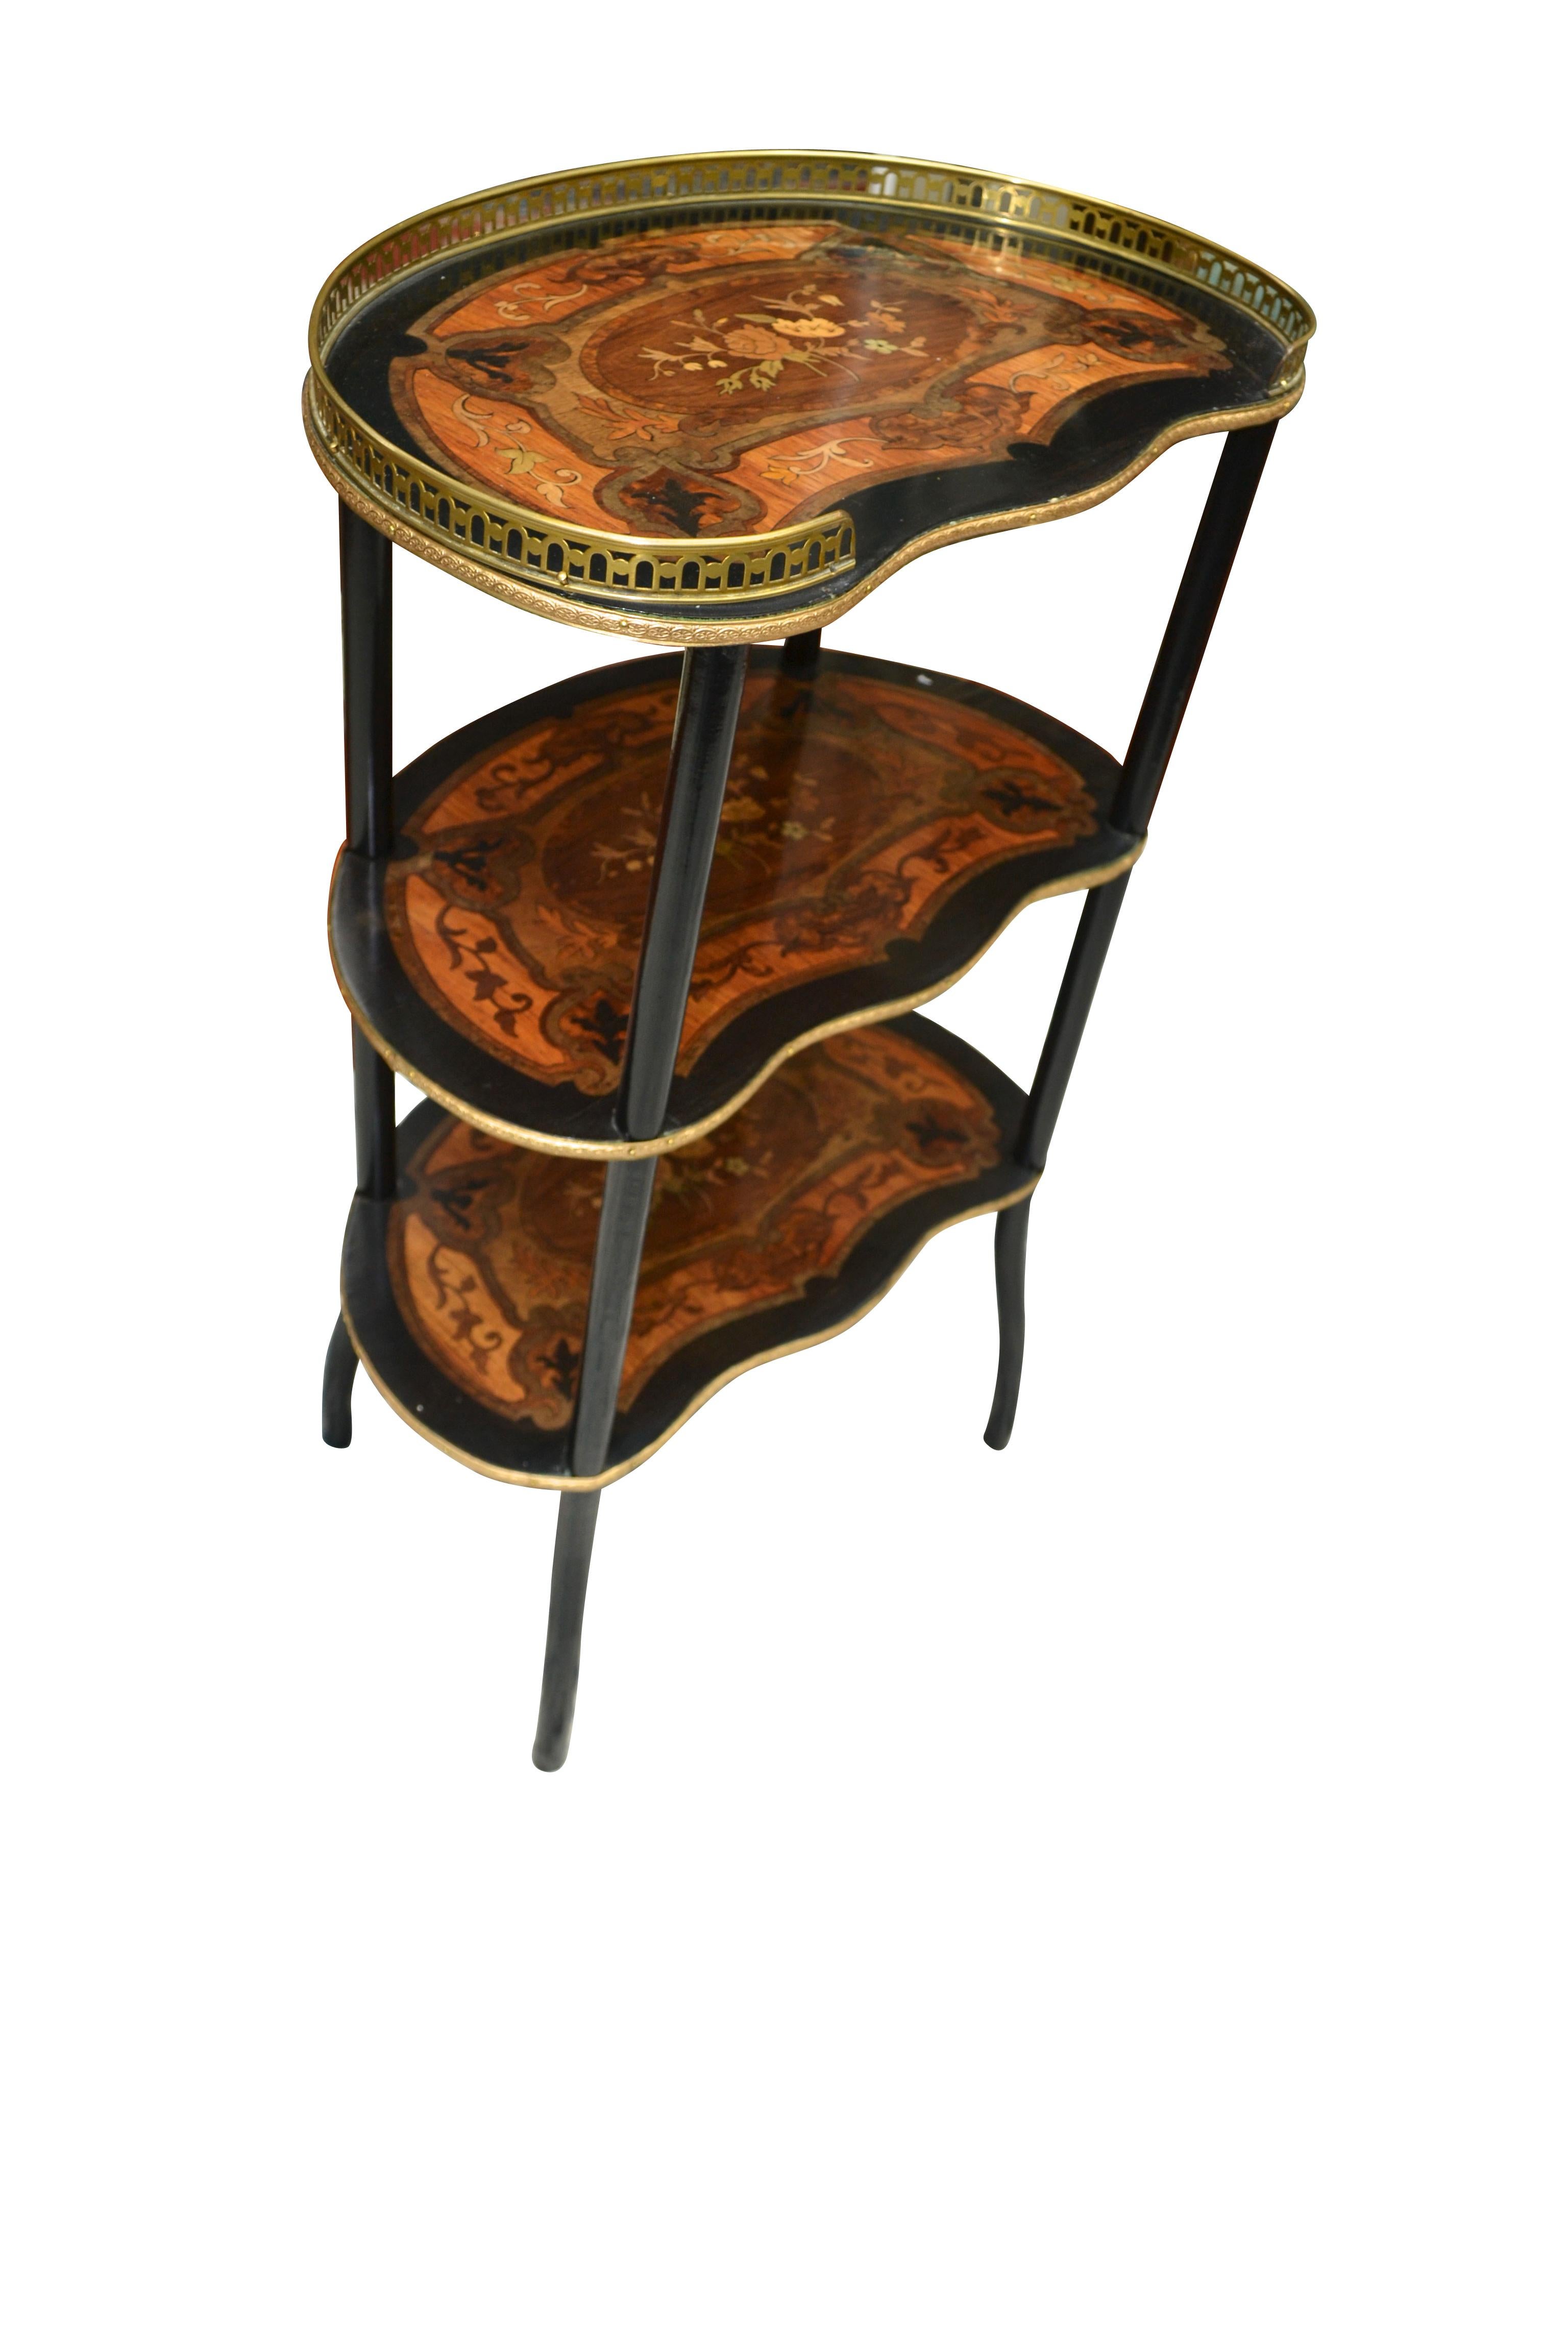 Fruitwood Three-Tiered Napoleon III French Marquetry Kidney shaped Desert Table